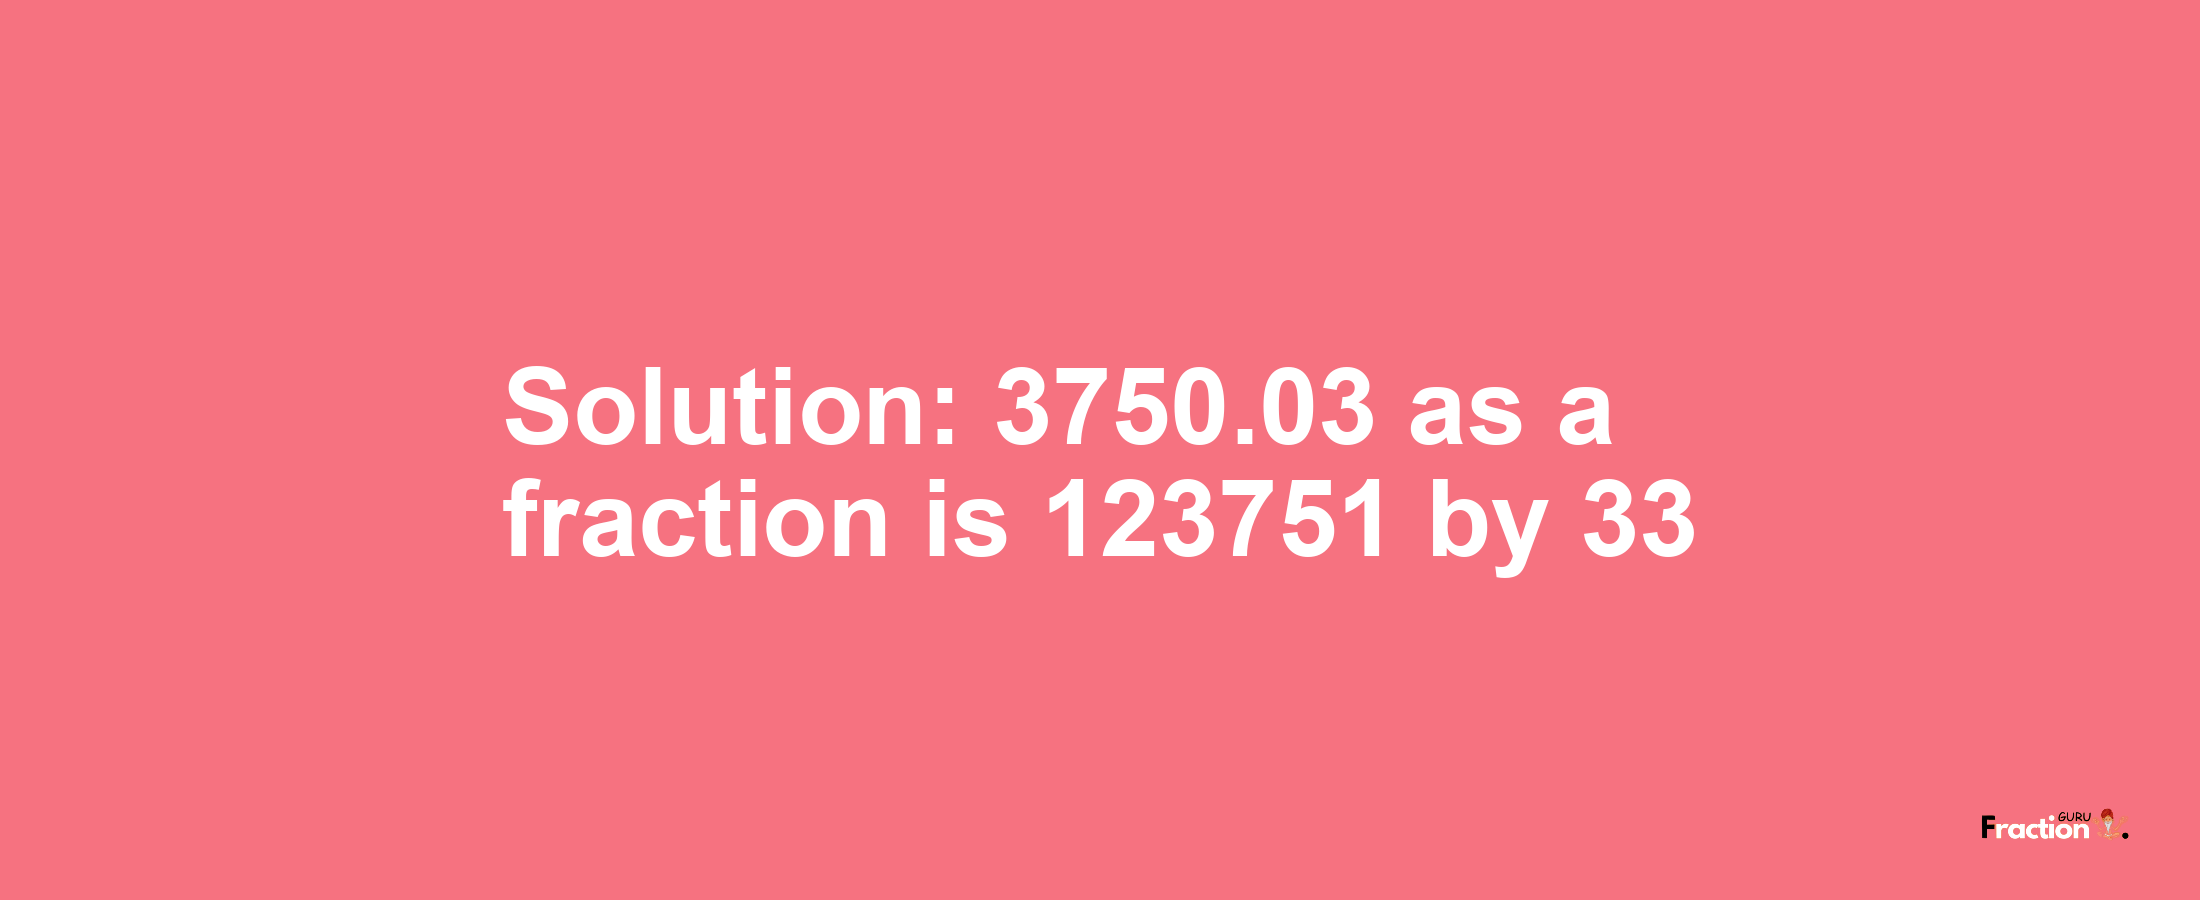 Solution:3750.03 as a fraction is 123751/33